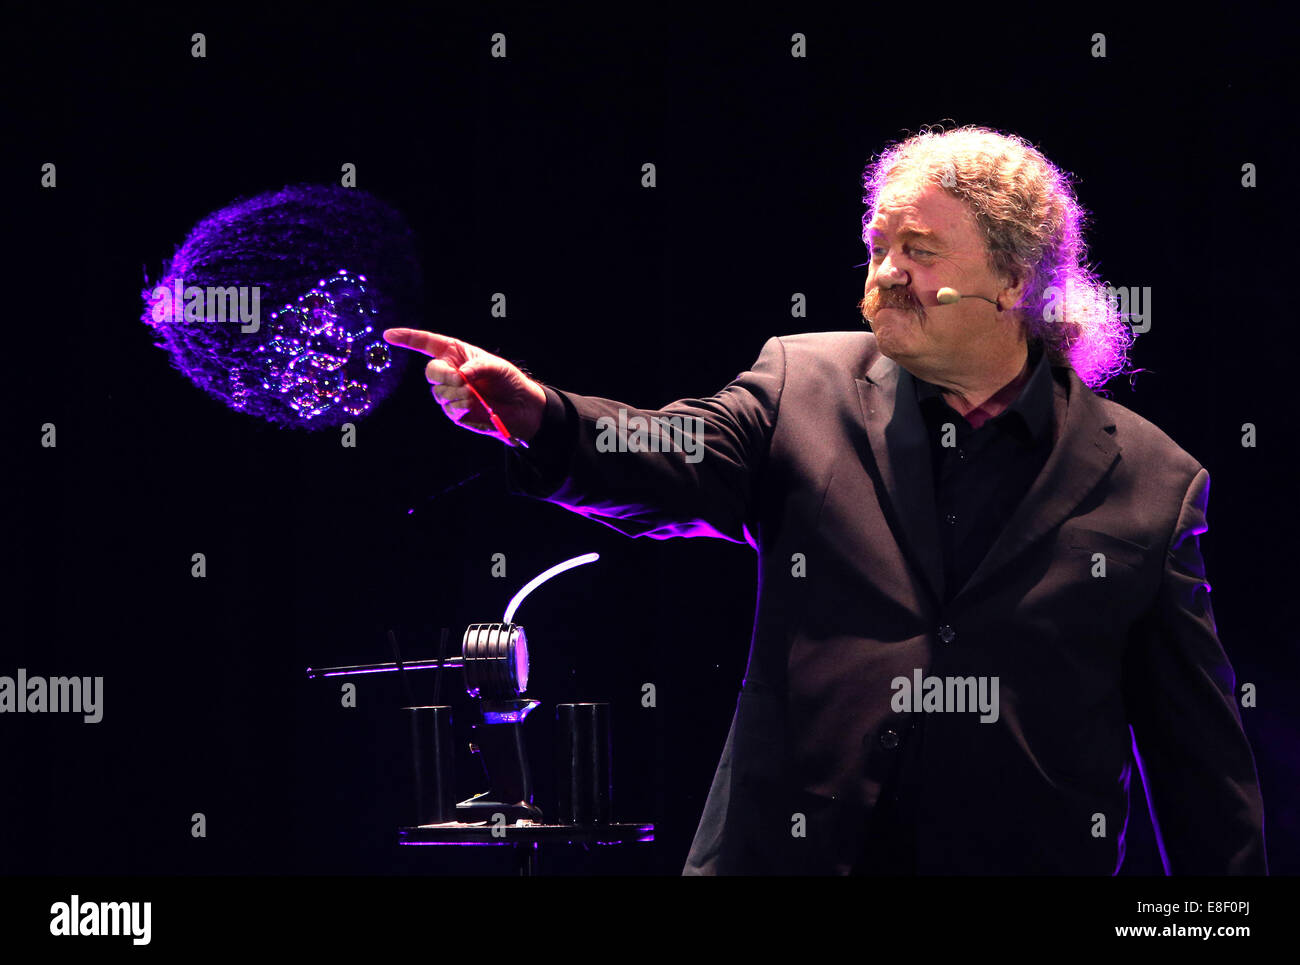 The US artist Tom Noddy is pictured on stage at the new Hansa Variete show  in the Hansa theater in Hamburg, Germany, 06 October 2014. The new program  premieres on 09 October